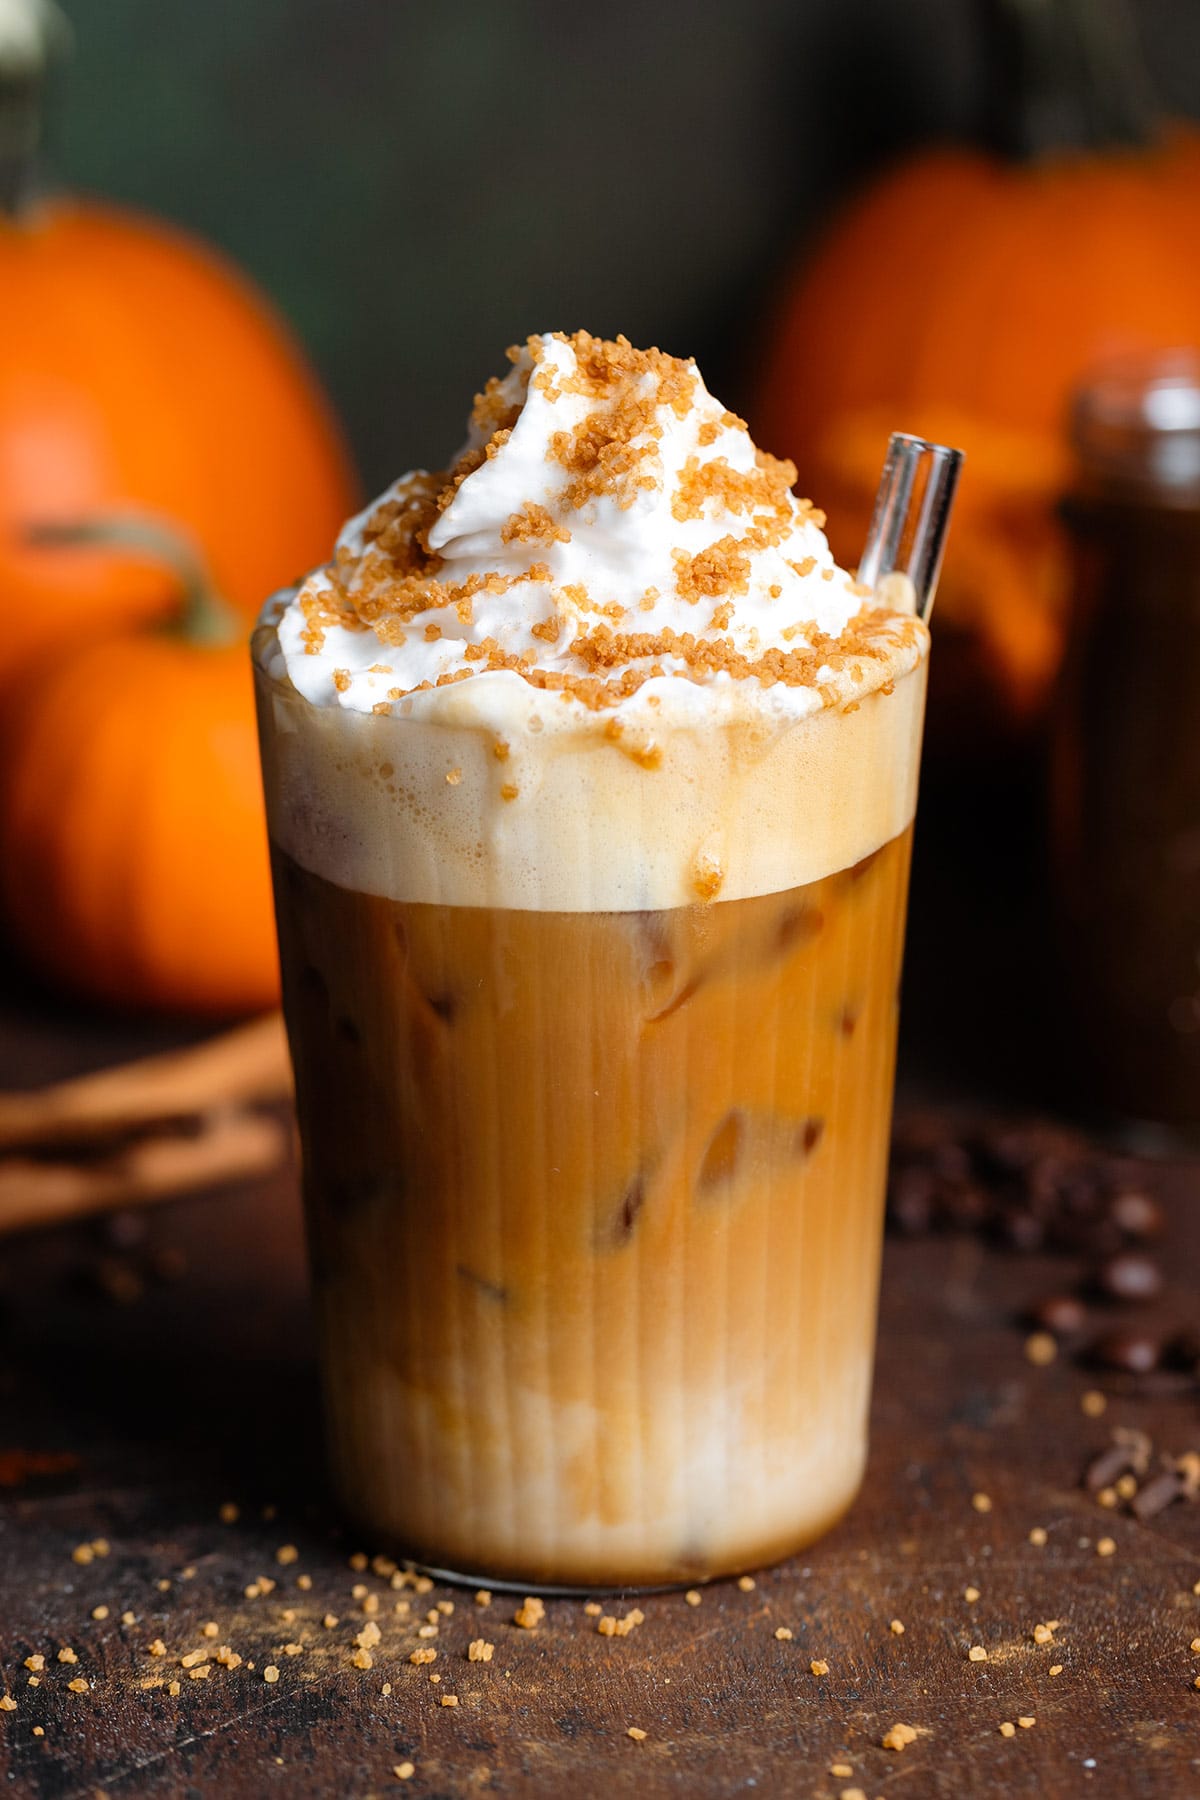 Iced pumpkin latte with whipped cream and sugar topping in a tall glass on a wooden backdrop with pumpkins in the background.